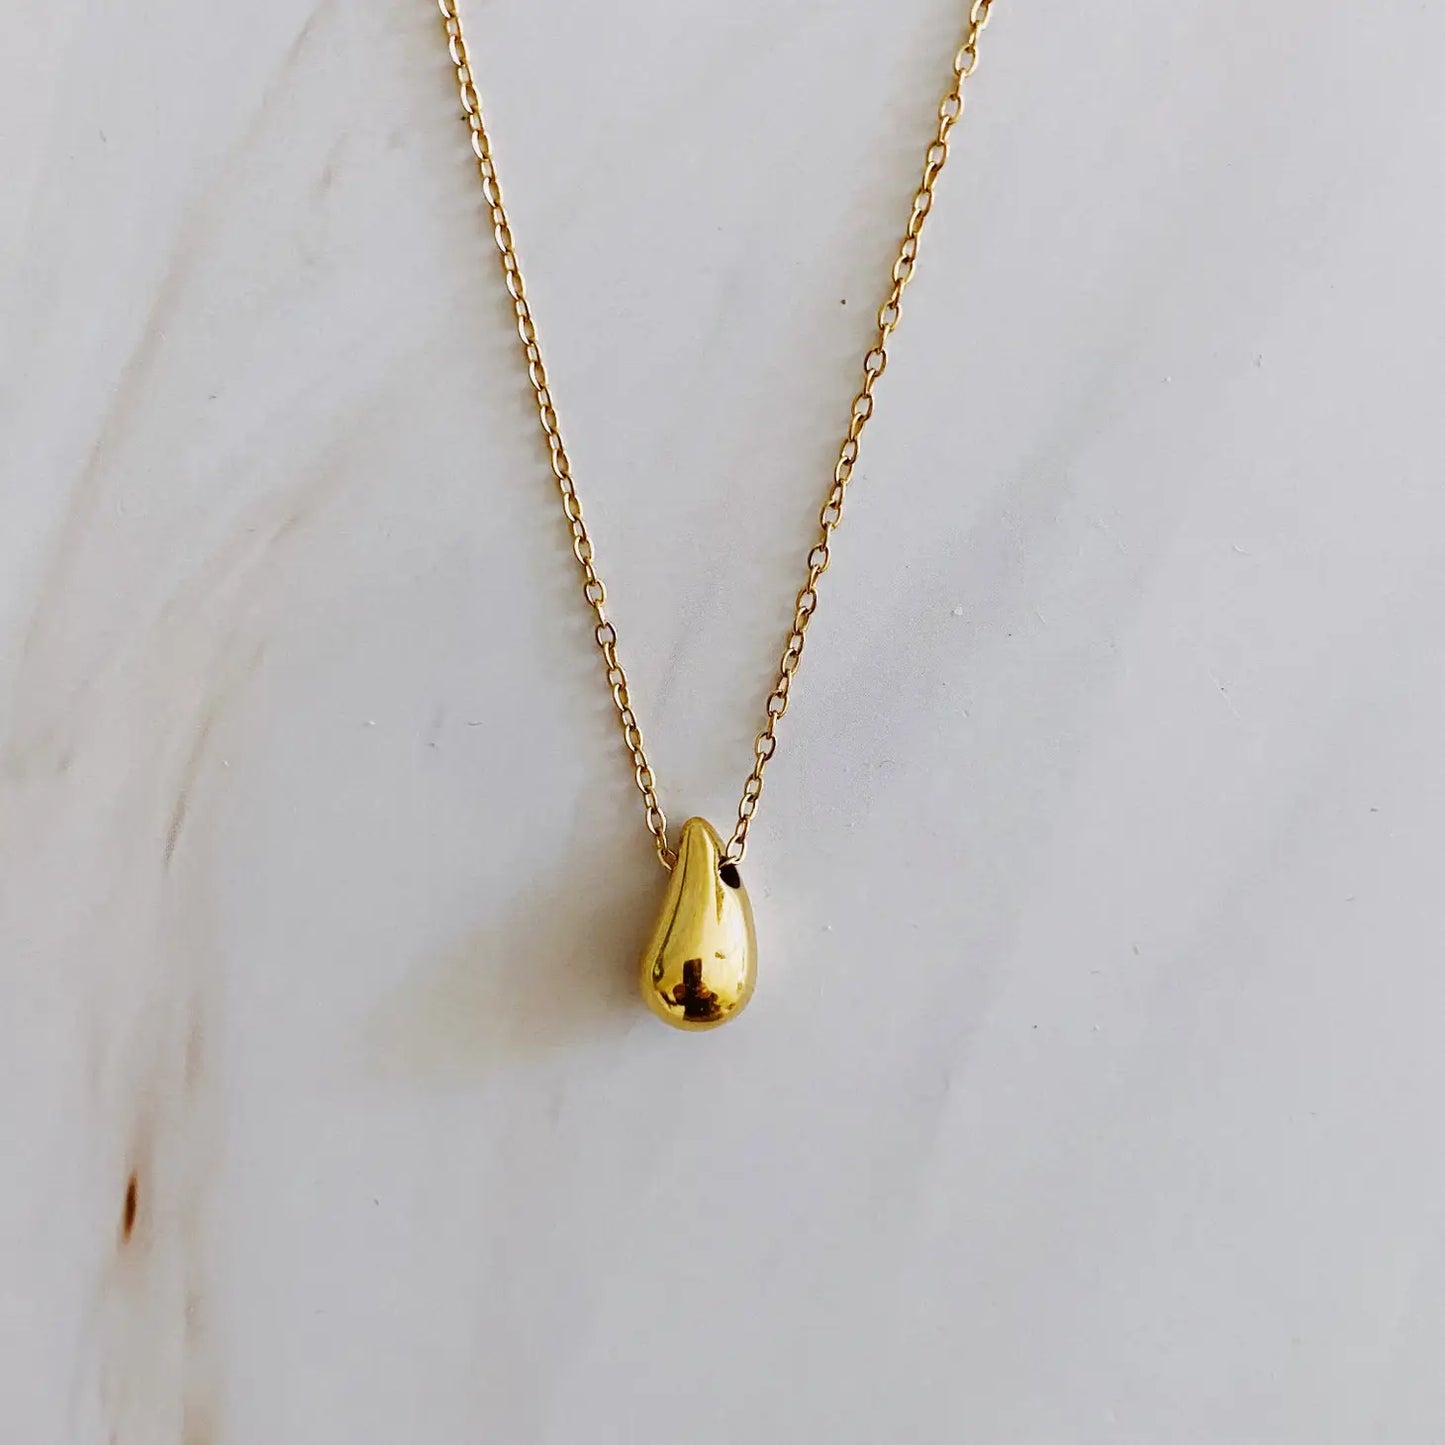 The Understated Teardrop Necklace